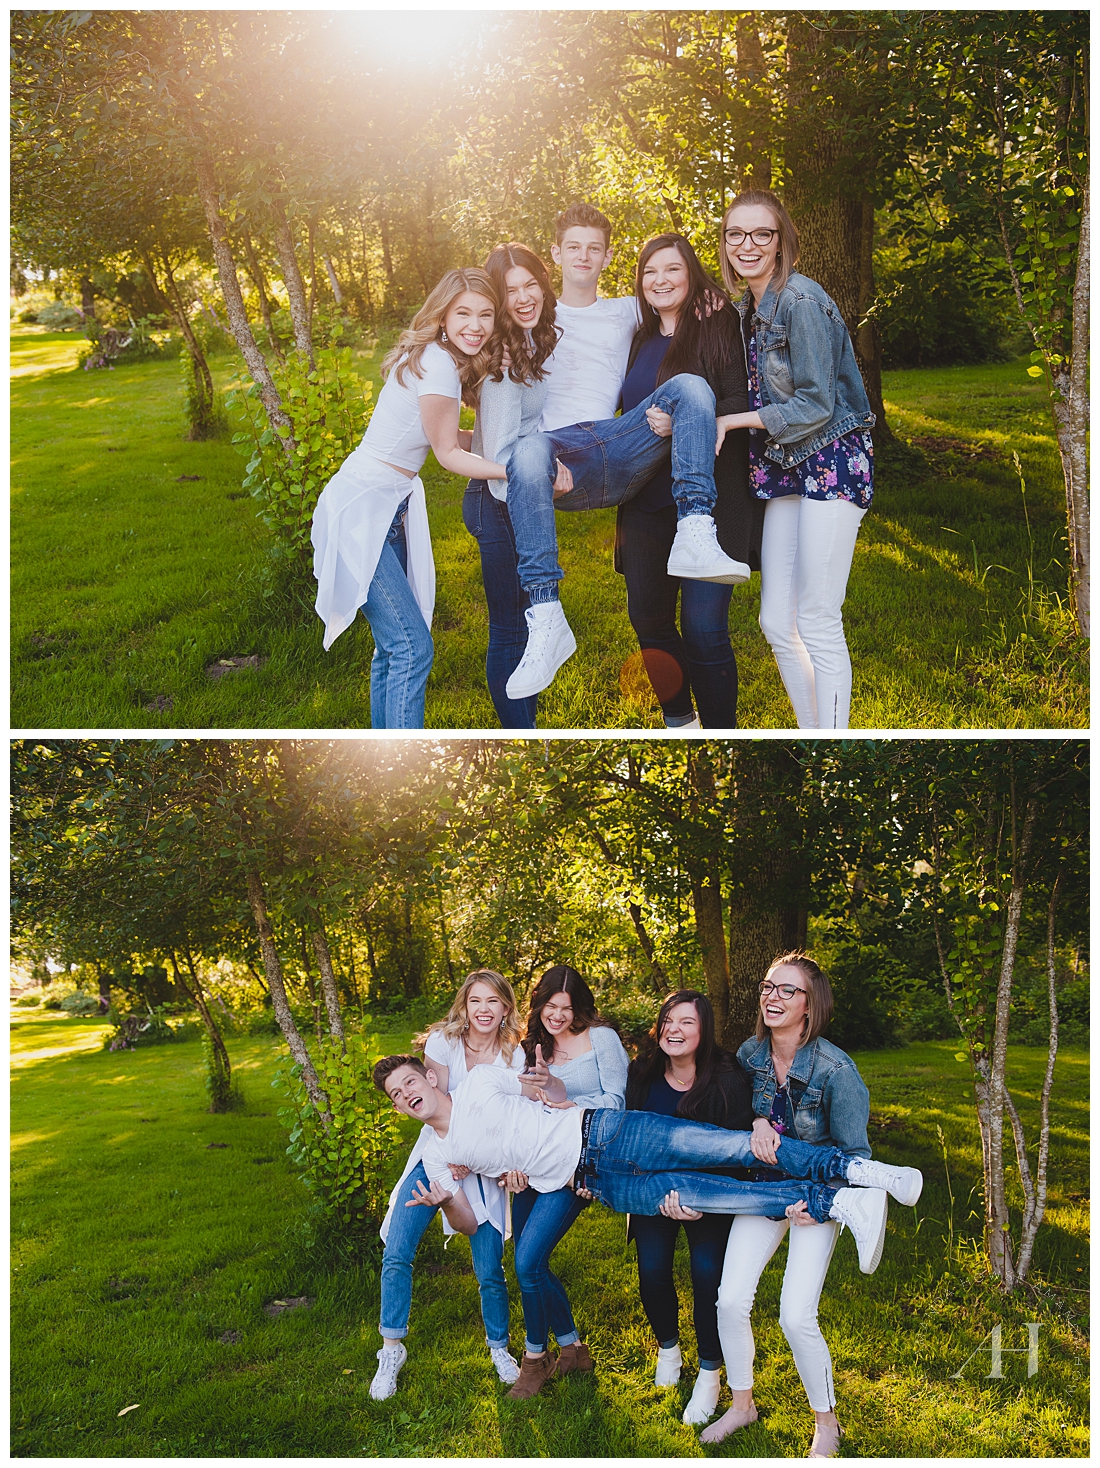 Summer Portraits with Sunlight | How to Style Jeans, Casual Outfit Ideas, Poses for Fun Family Portraits, What to Wear Guide, Cute Family Portraits | Photographed by Tacoma Senior Photographer Amanda Howse